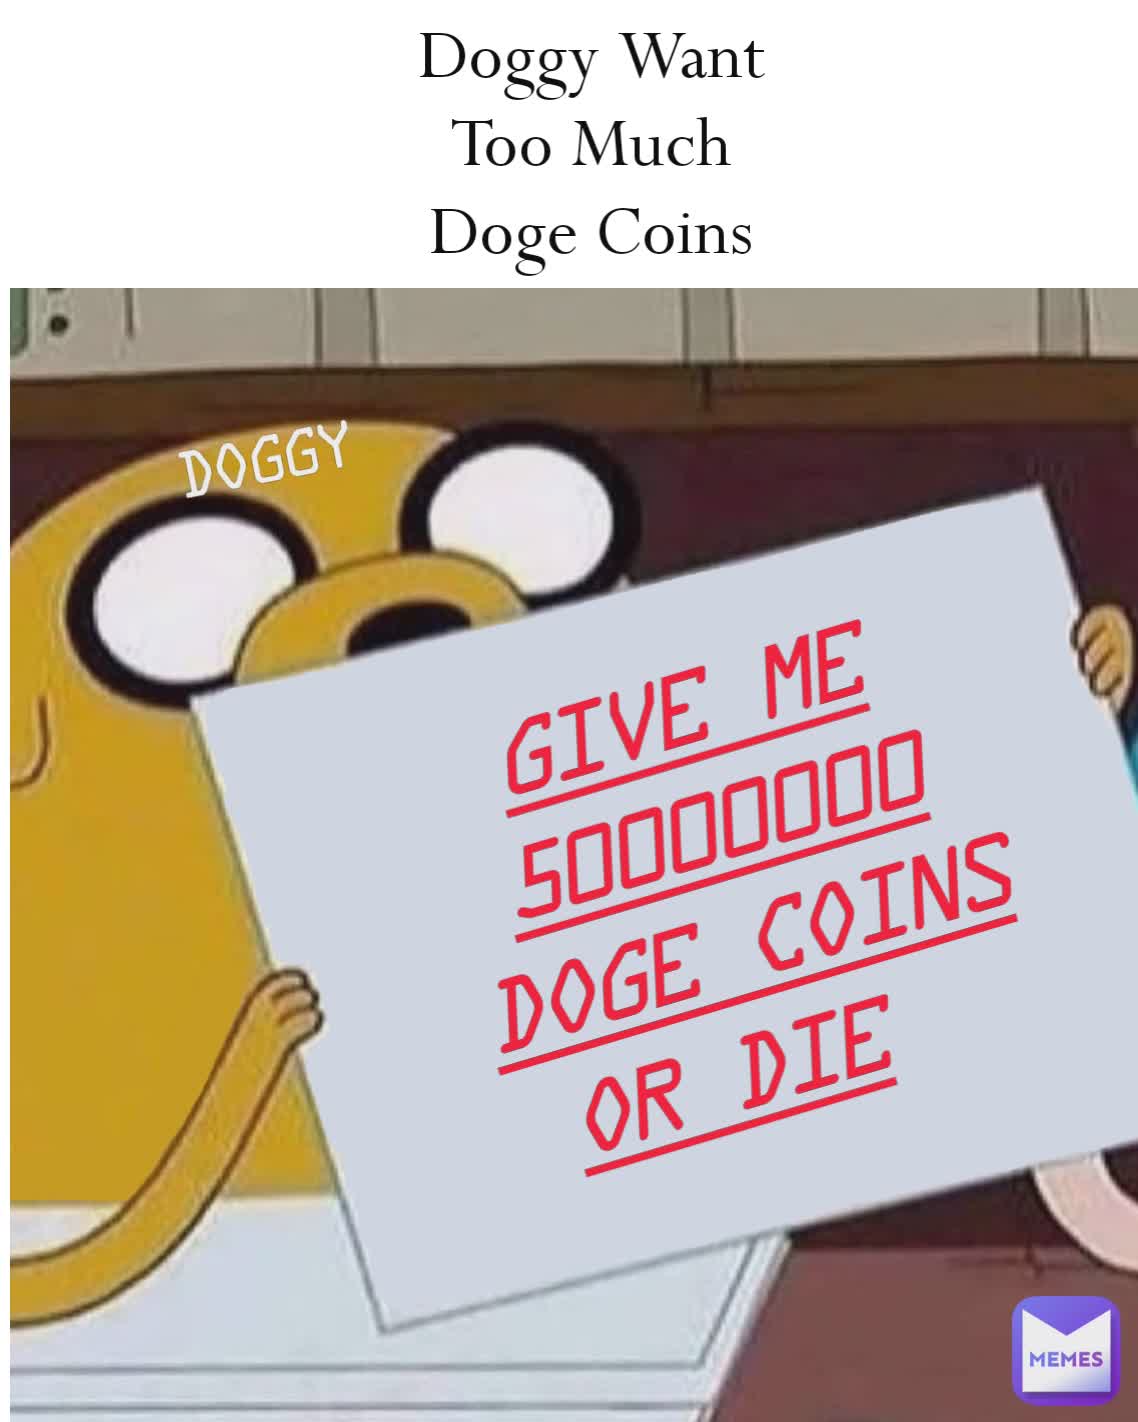 Purple Guy Want Kill You Purple Guy Want Kill You Give Me Doge Coins Or Die Doggy Doggy Want Too Much Doge Coins Selever Memes